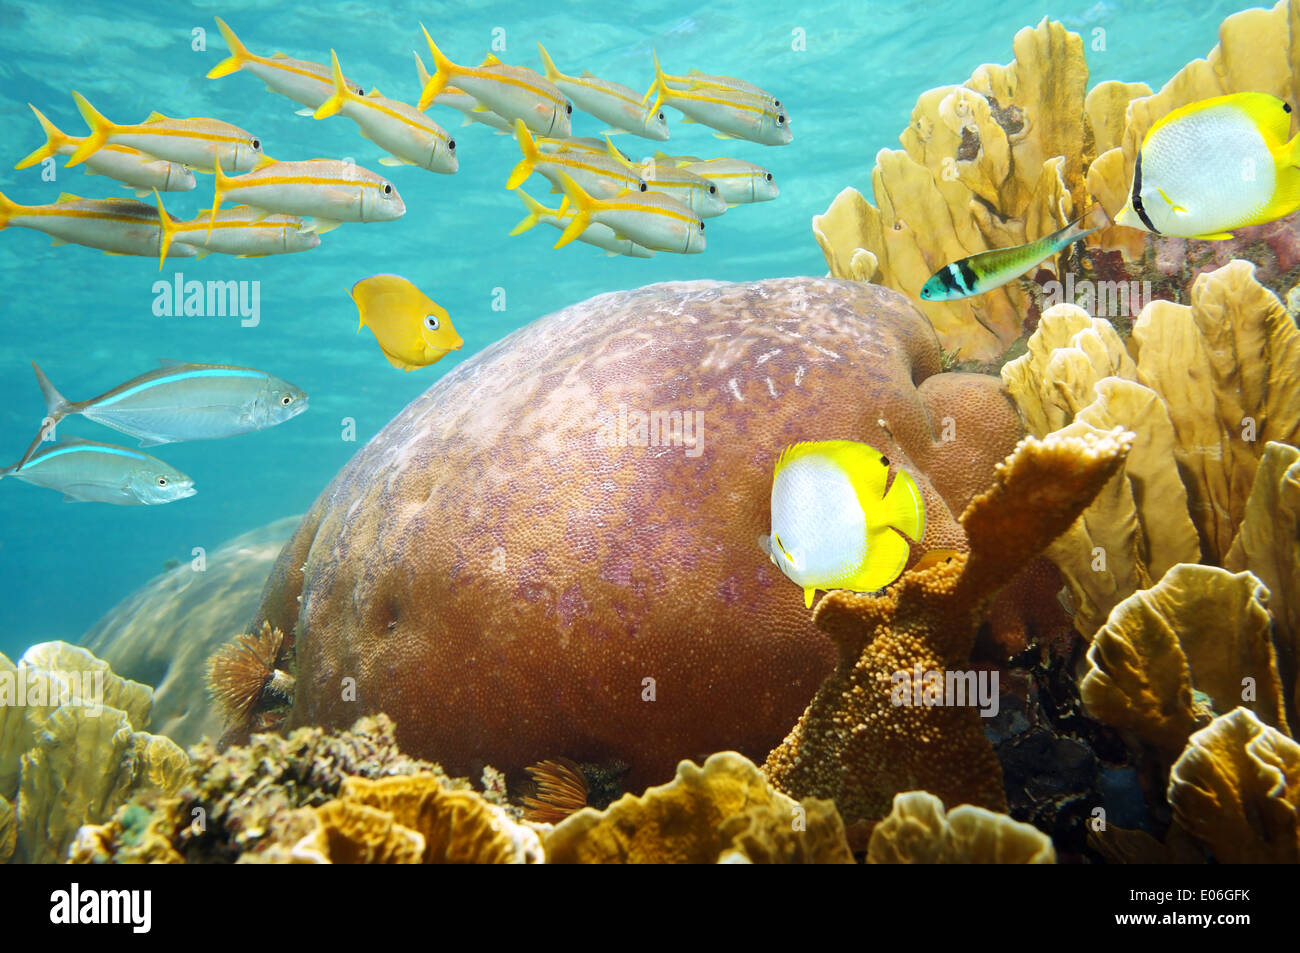 Underwater, healthy coral reef with fish school, Caribbean sea Stock Photo